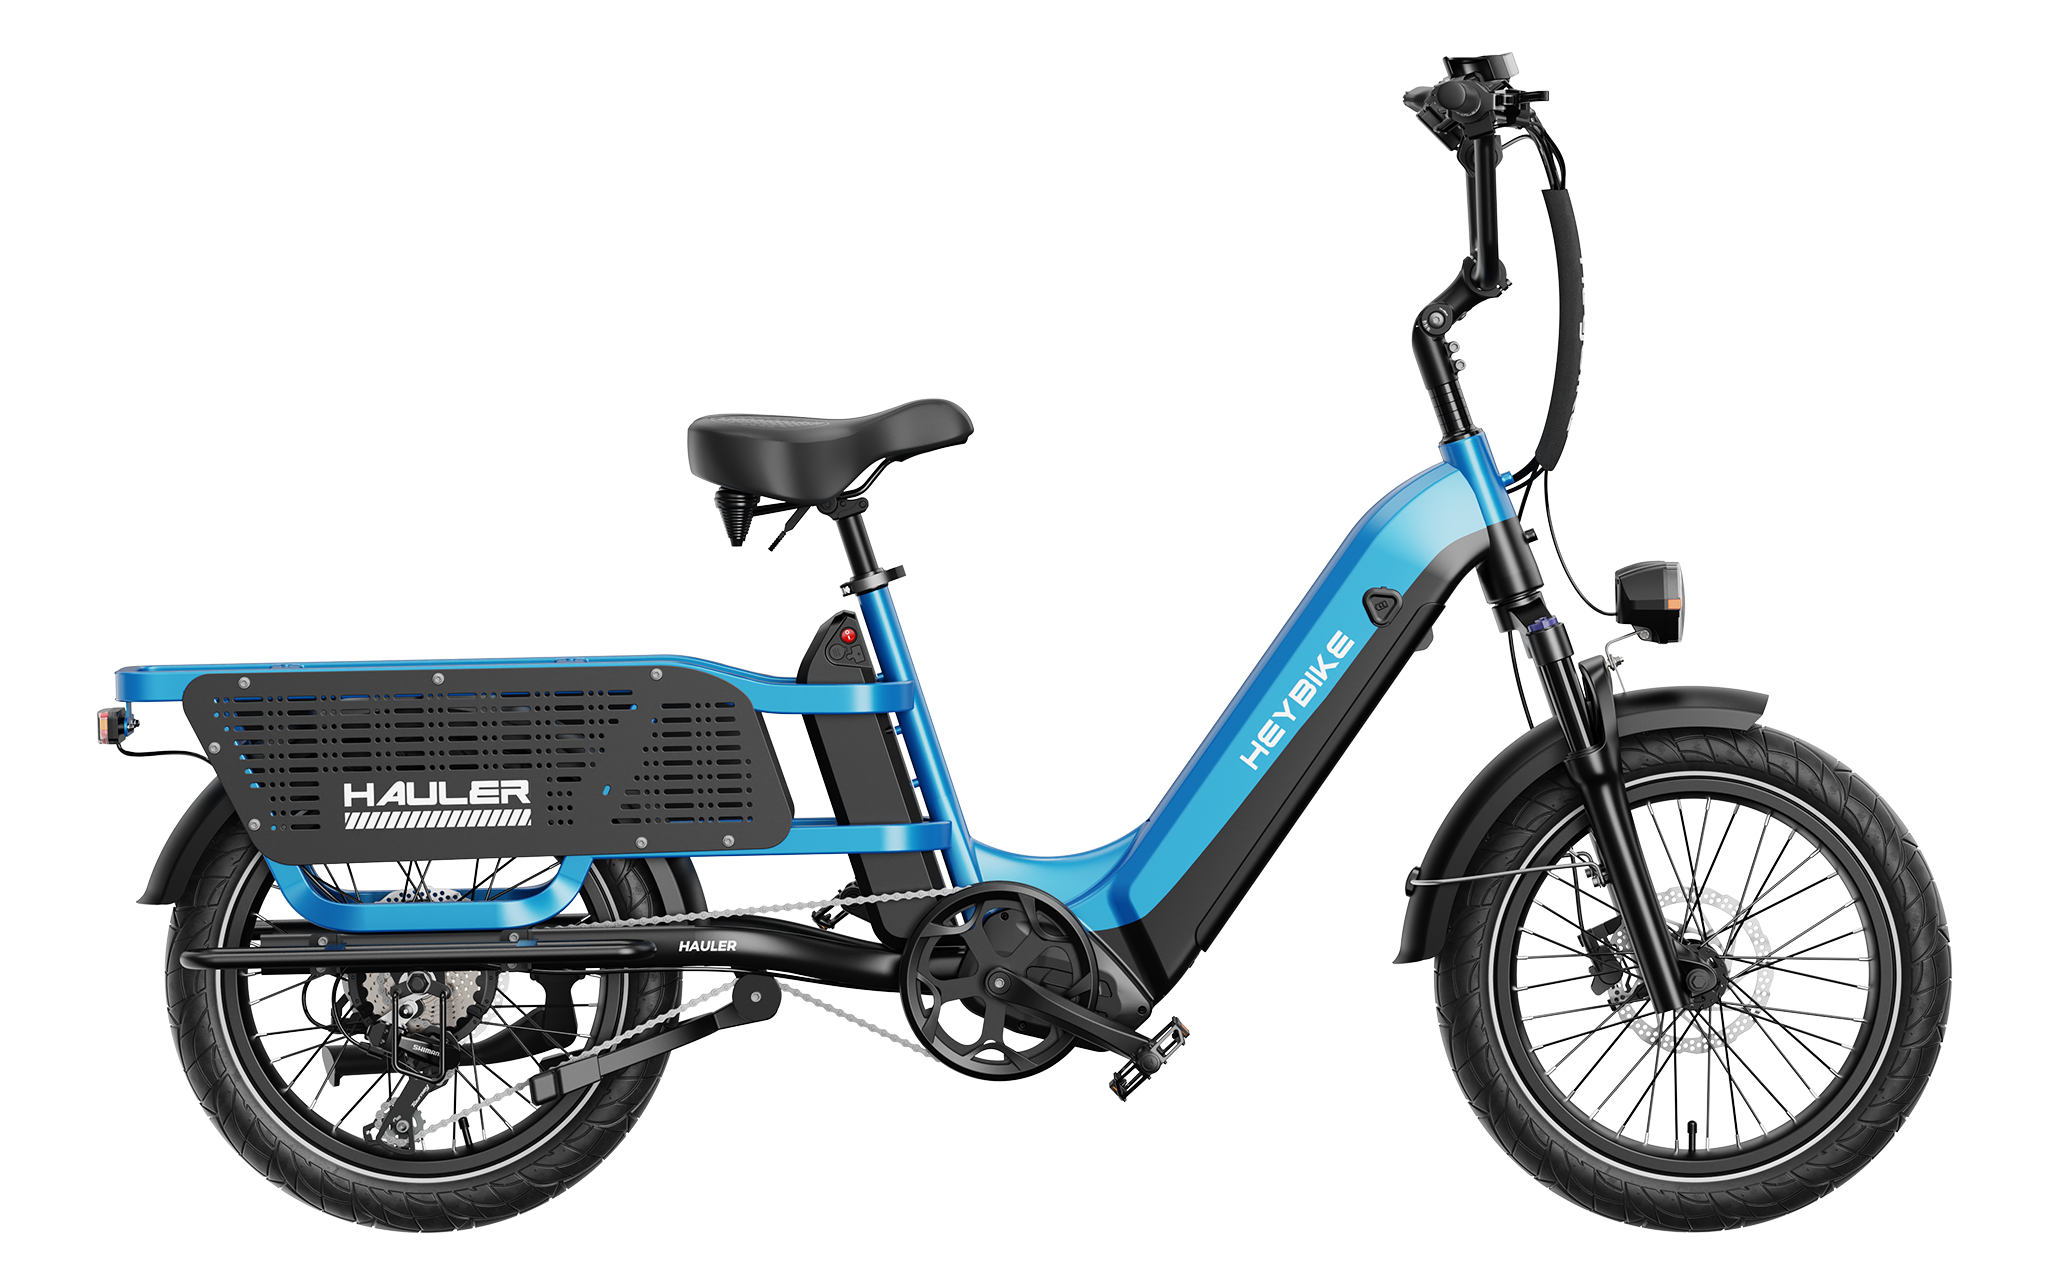 Hauler - Electric cargo ebike with dual battery, blue